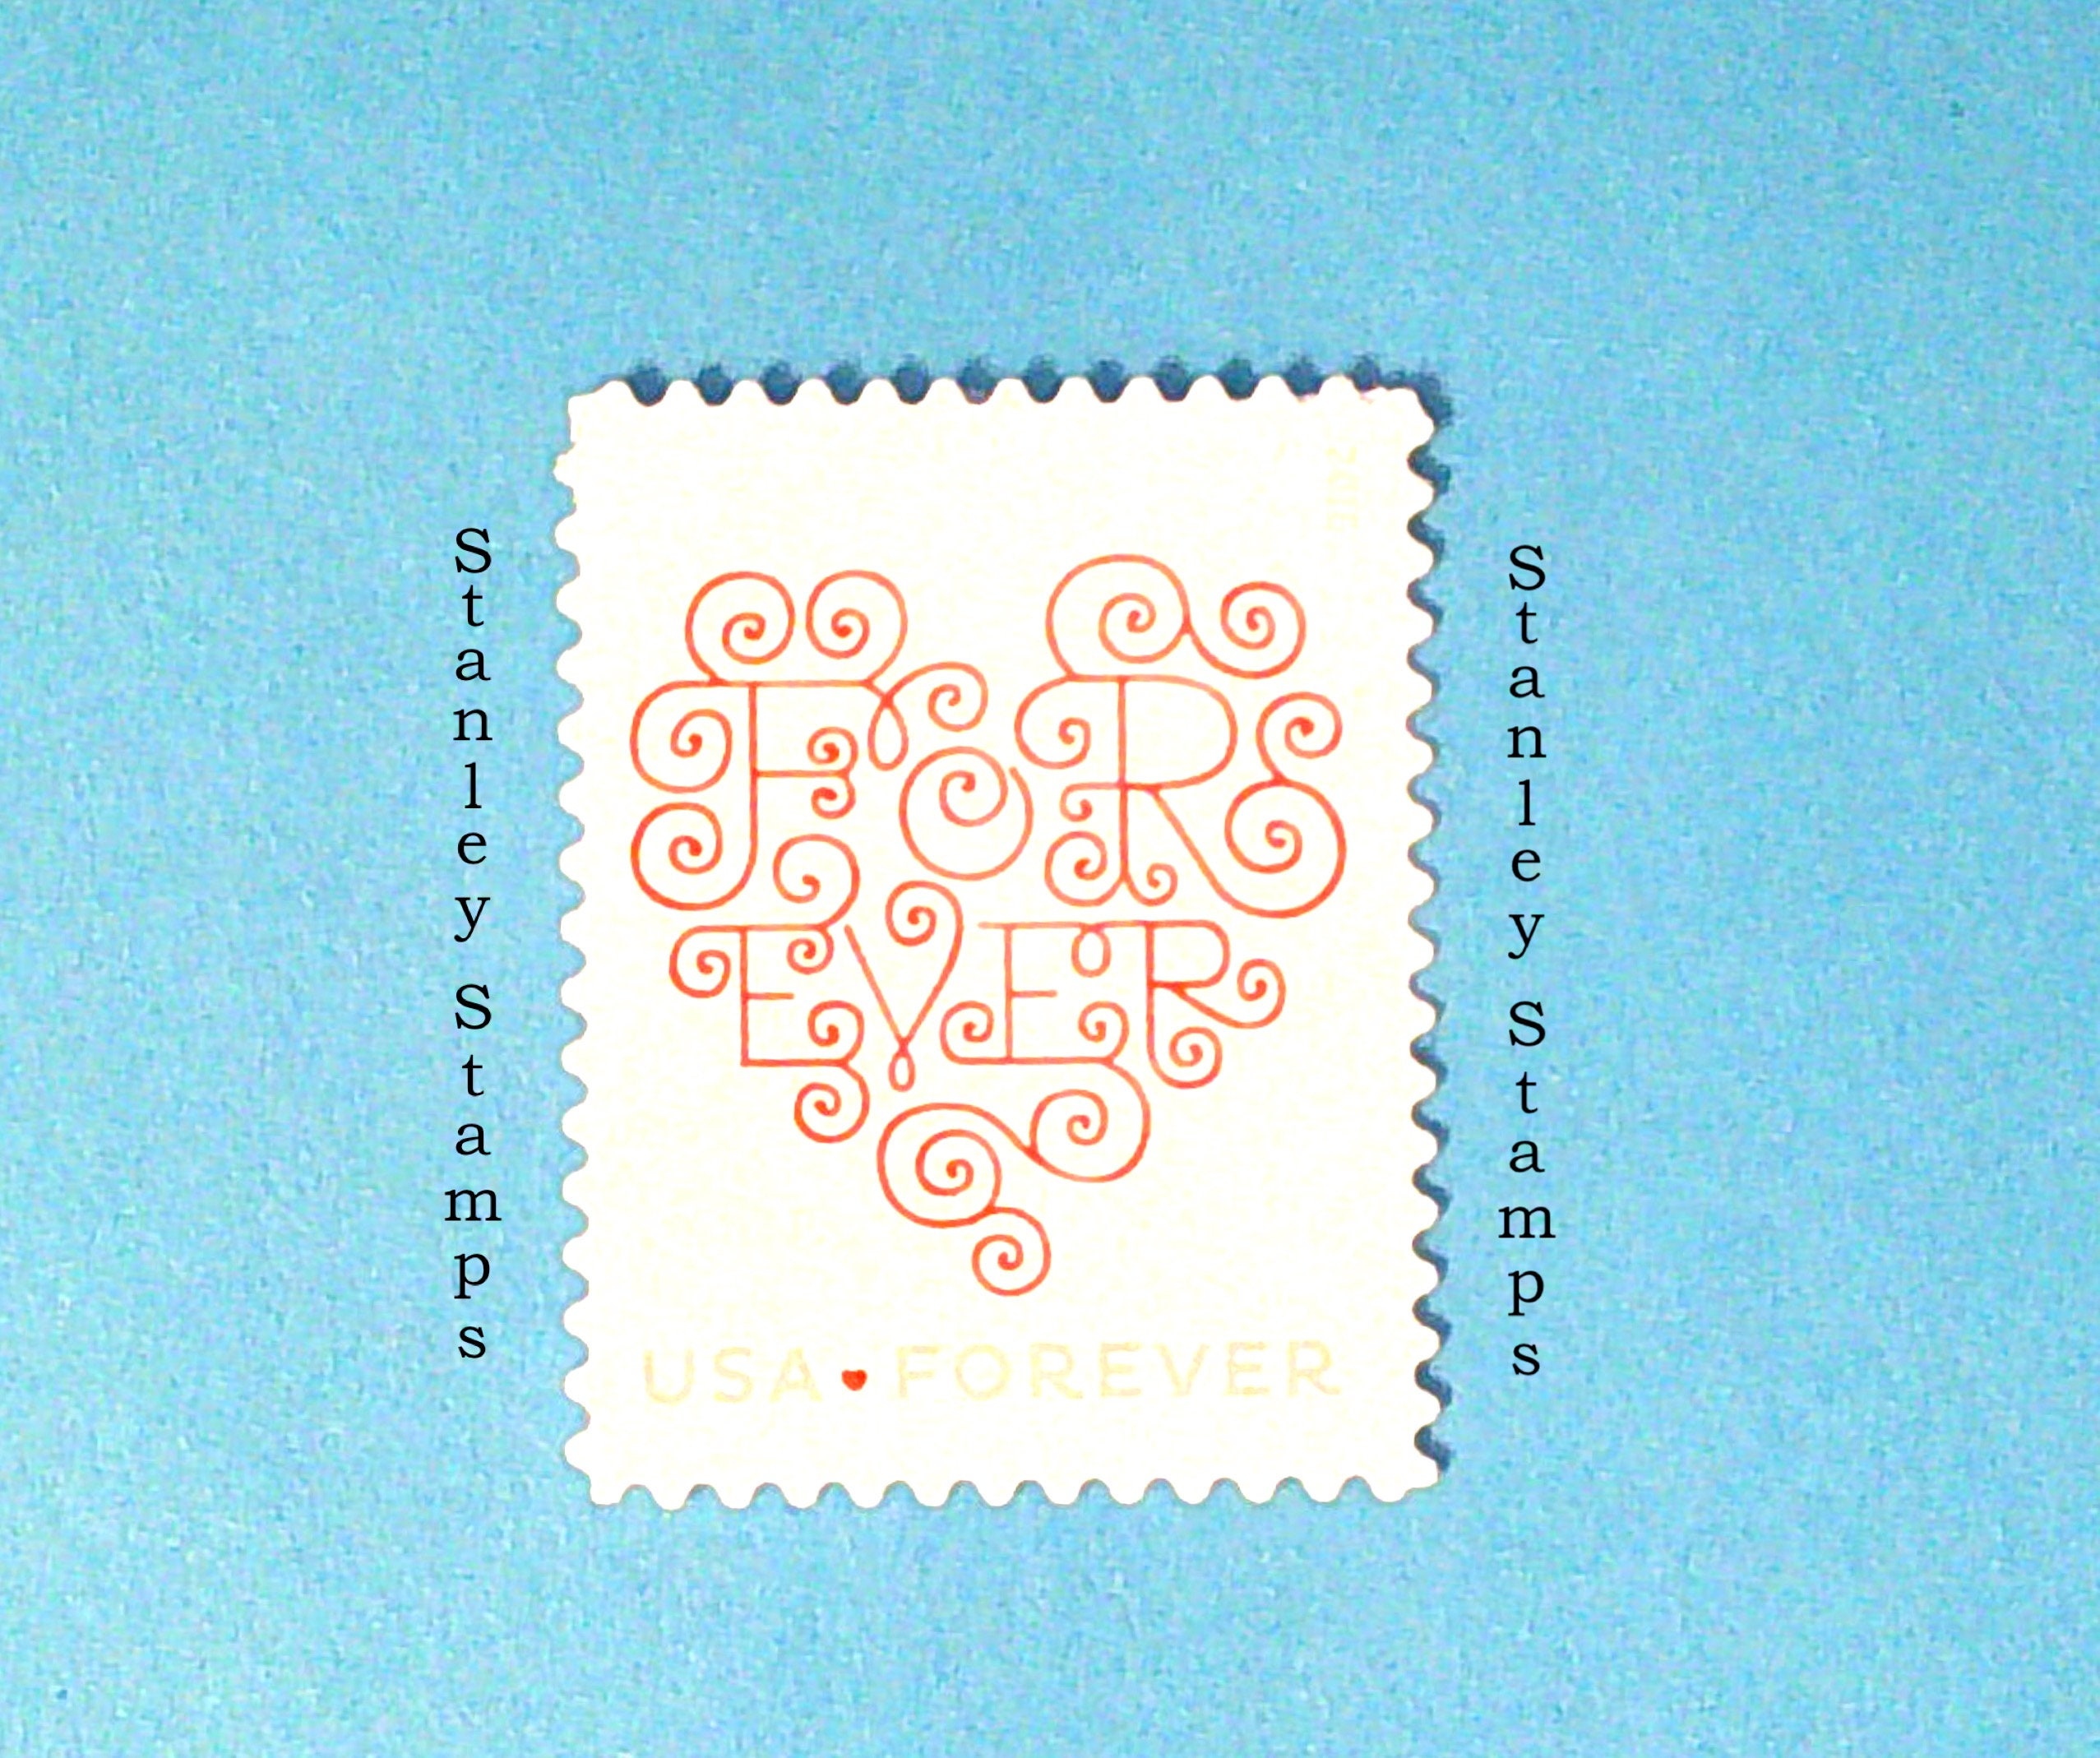 4956 - 2015 First-Class Forever Stamp - Love Series: White Forever Heart -  Mystic Stamp Company